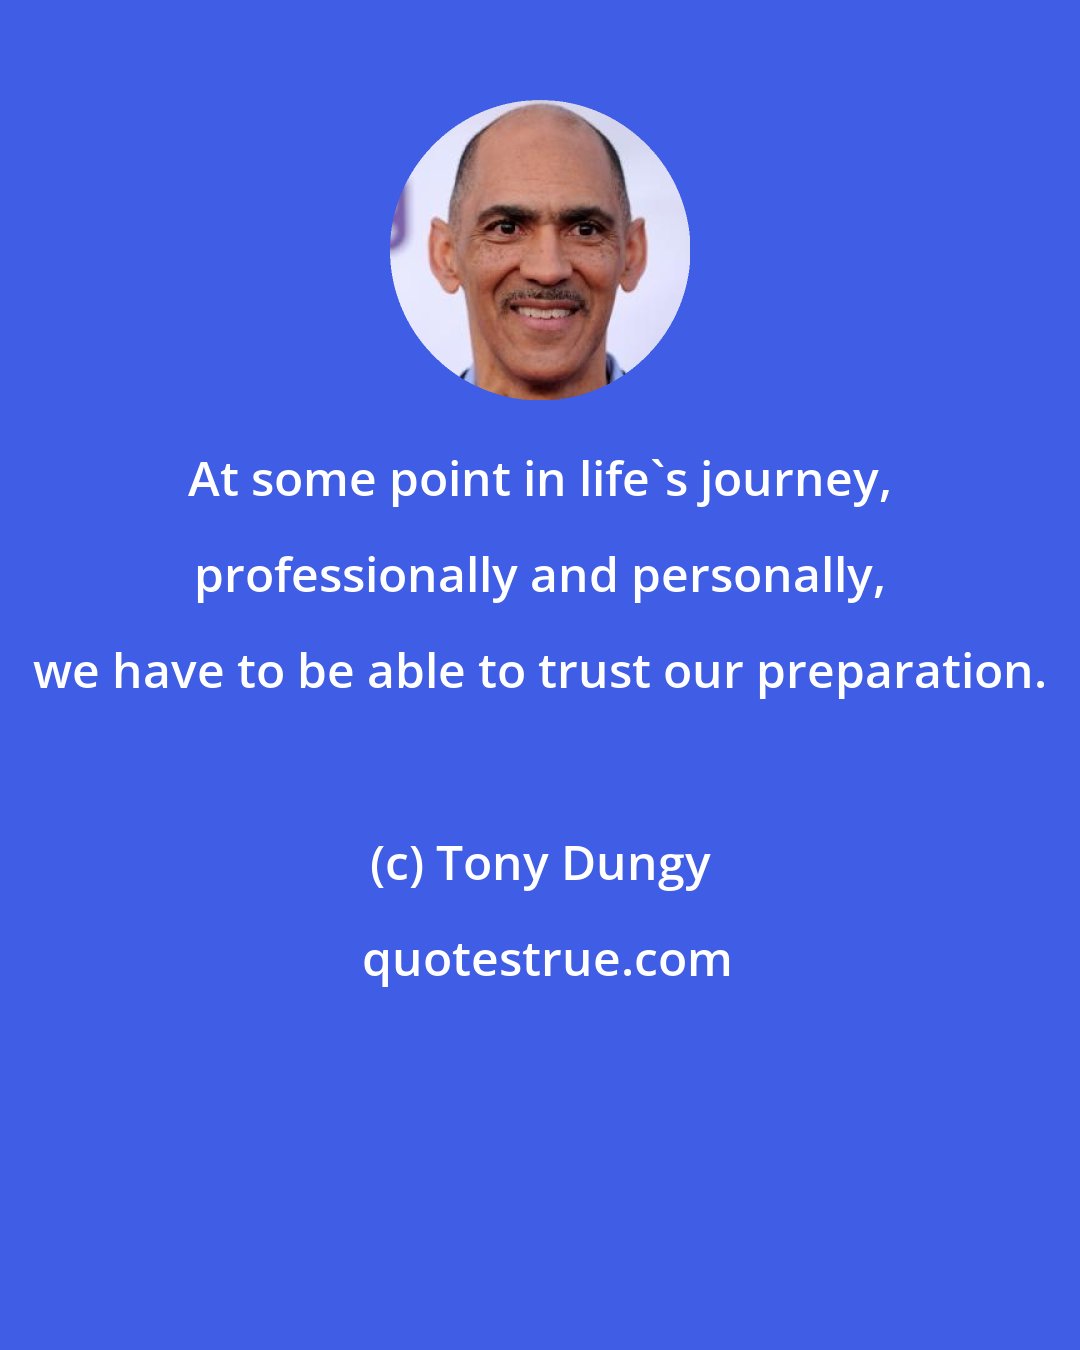 Tony Dungy: At some point in life's journey, professionally and personally, we have to be able to trust our preparation.